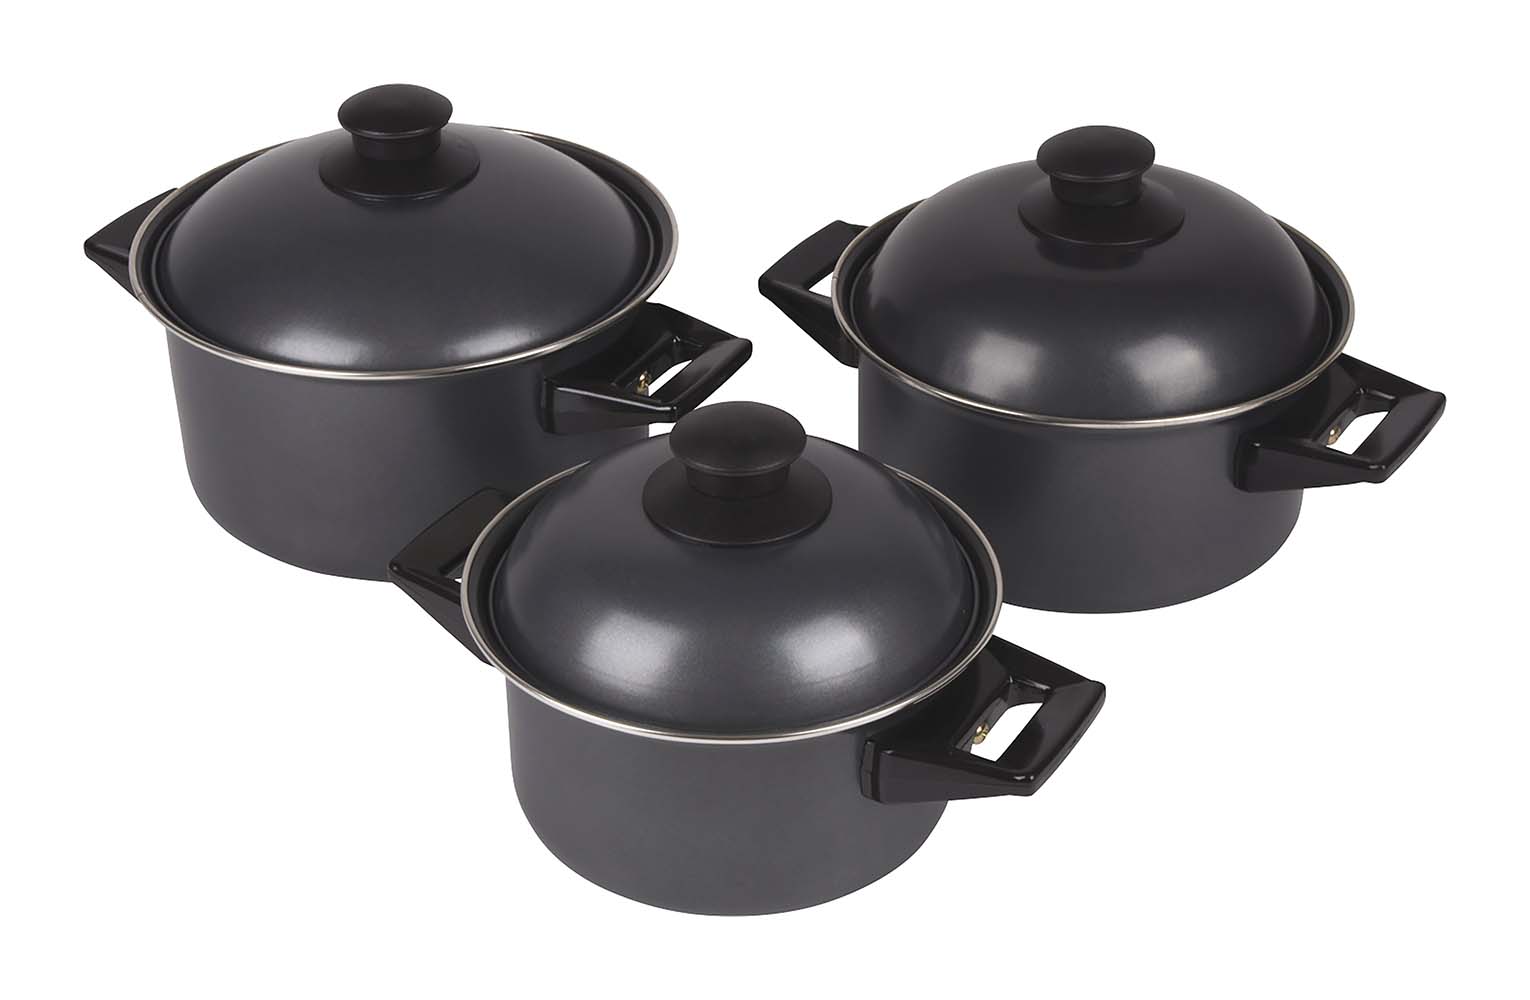 2300320 A sturdy 3-part cookware set. These cooking pans are made from sturdy carbon steel. Every pan is also equipped with heat-resistant handles, a non-stick layer and a lid. Can be used on gas, ceramic and electrical heat sources. Dimensions (Øxh): 20x10, 18x9 and 16x8.5 cm. Contents: 1,7, 2,3 and 3.1 litres.